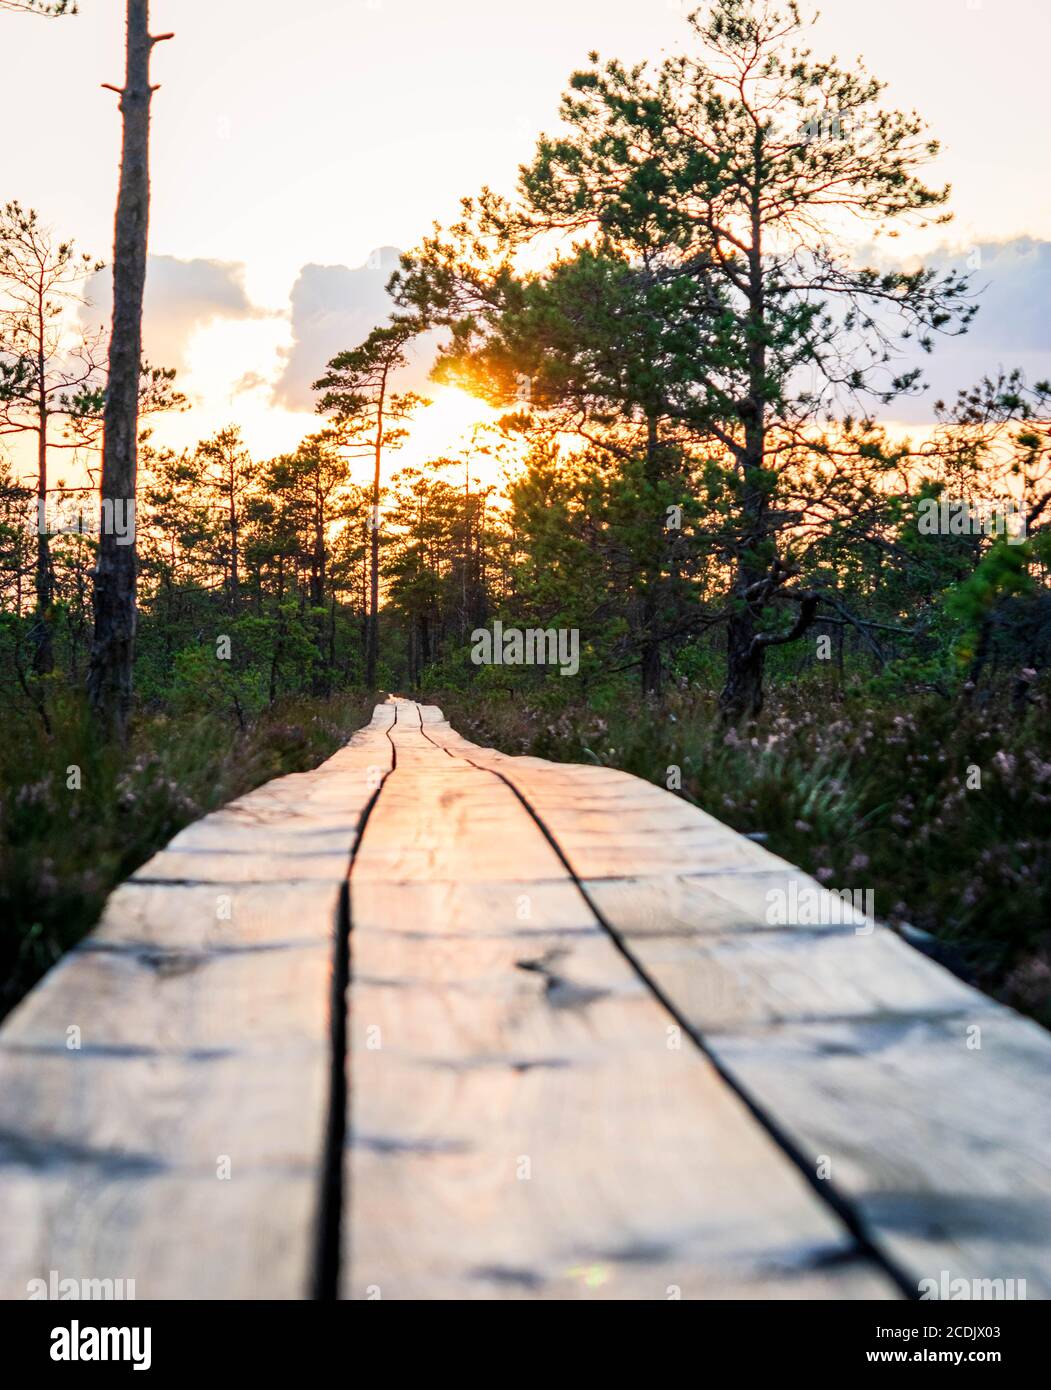 Uneven wooden plank-way leading through heather bushes and pine trees with sunset on background. Stock Photo